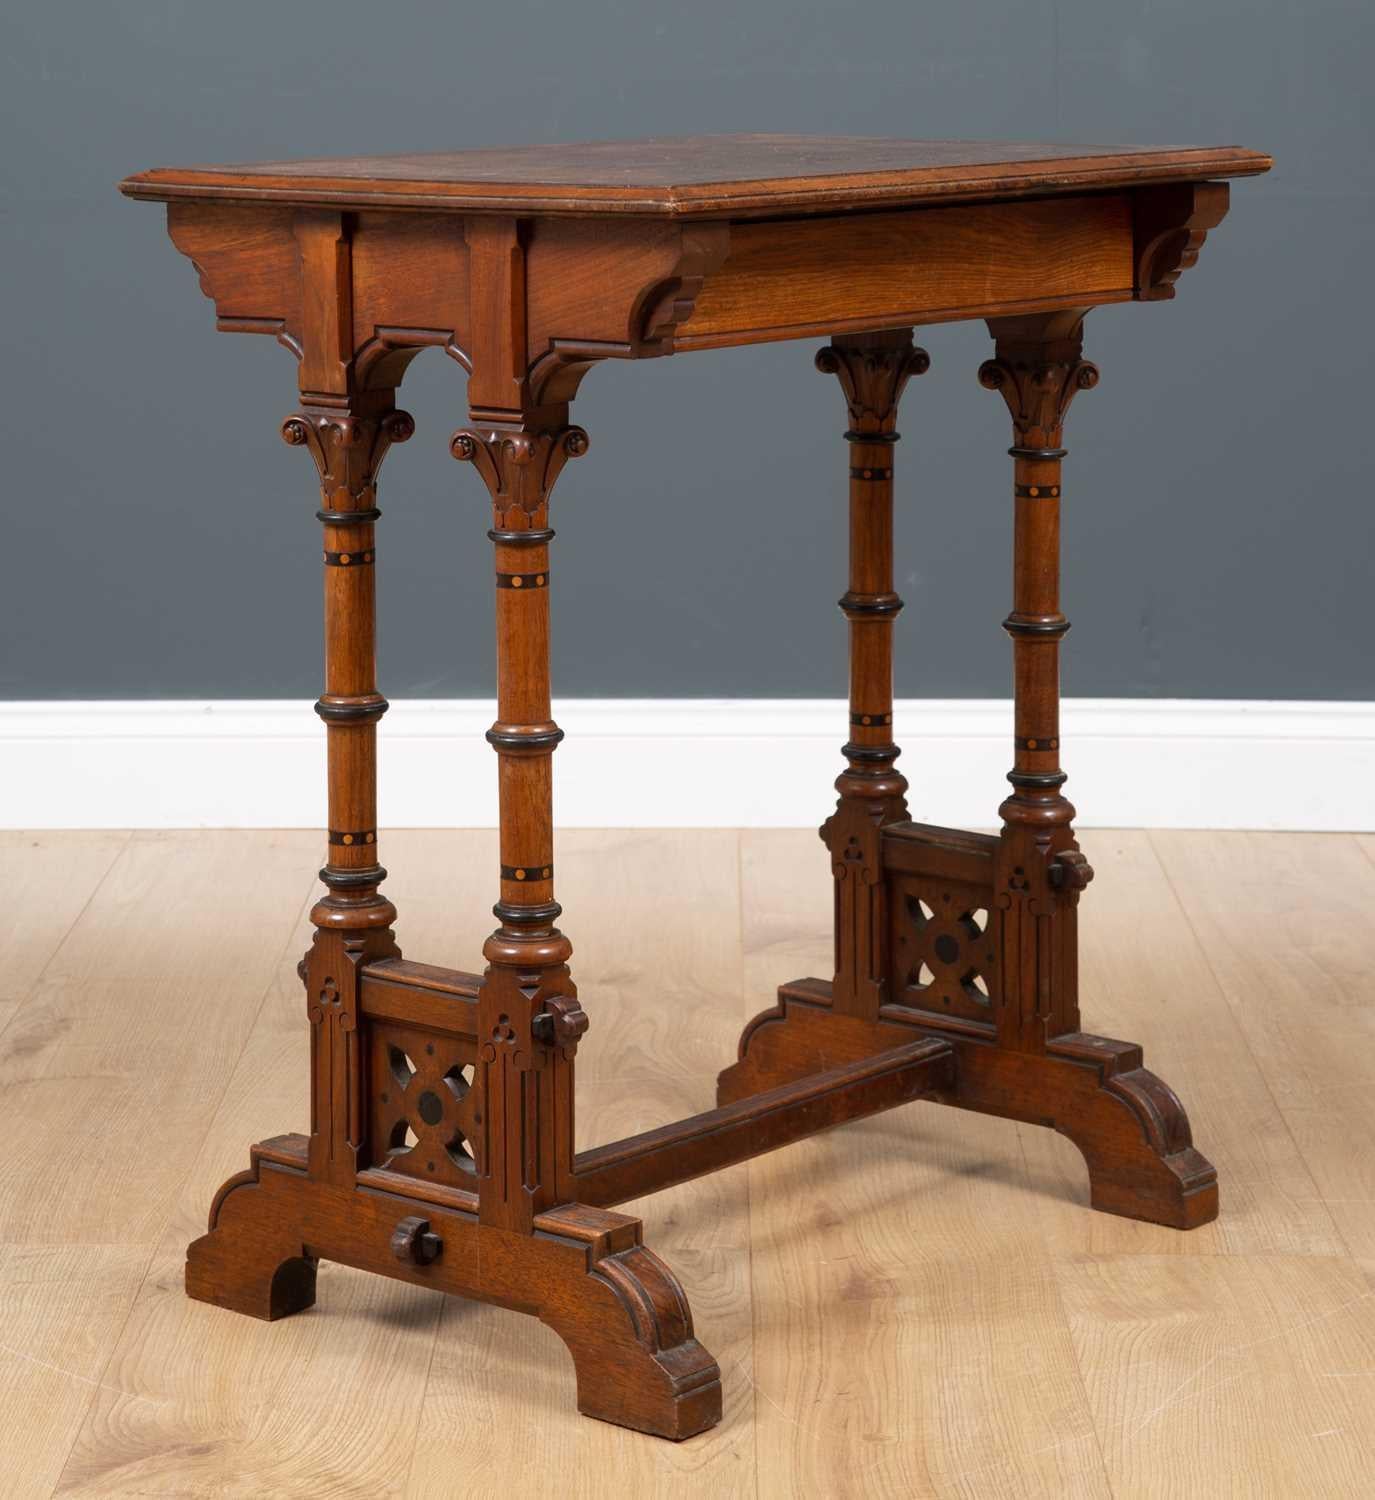 Charles Bevan. For Marsh and Jones of Leeds. A rare Gothic Revival Walnut with Burr Walnut top side table, with molded edge to the burr walnut top, a single drawer and raised on corinthian column legs with ring turnings and dot and circular inlays,